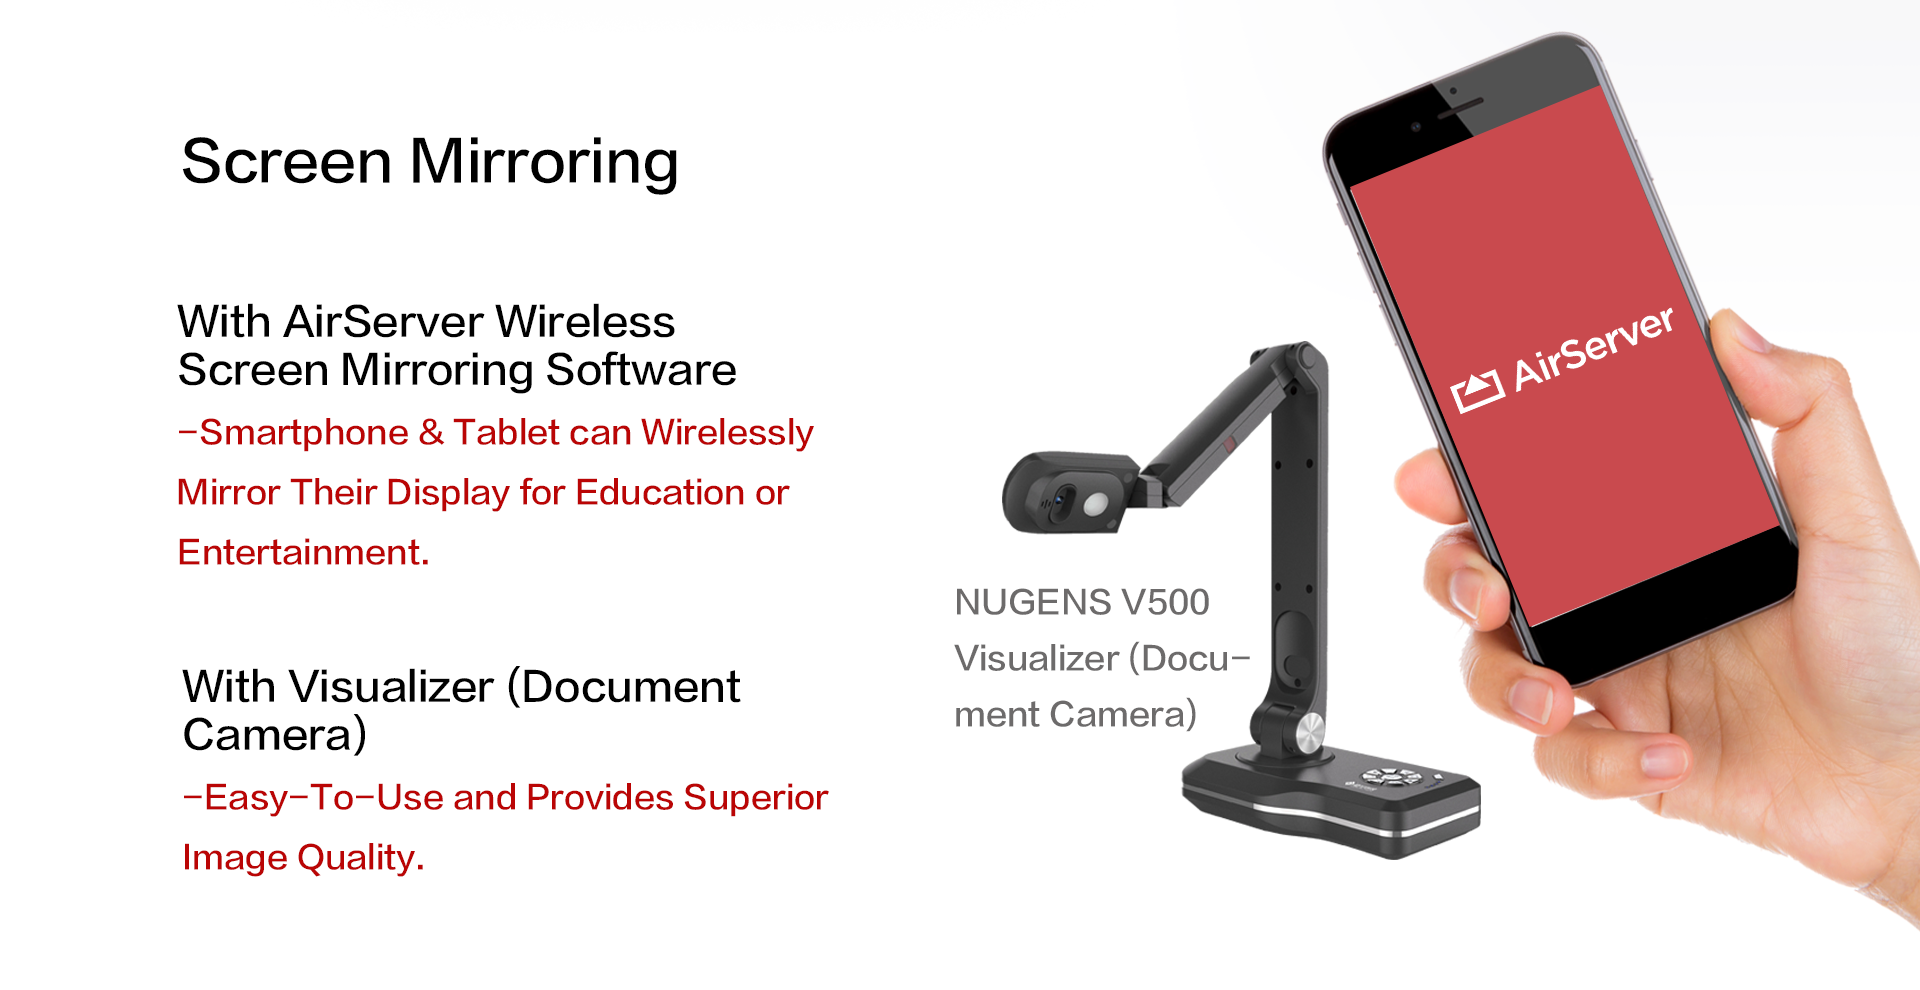 With AirServer Wireless Screen Mirroring Software,With Visualizer (Document Camera)